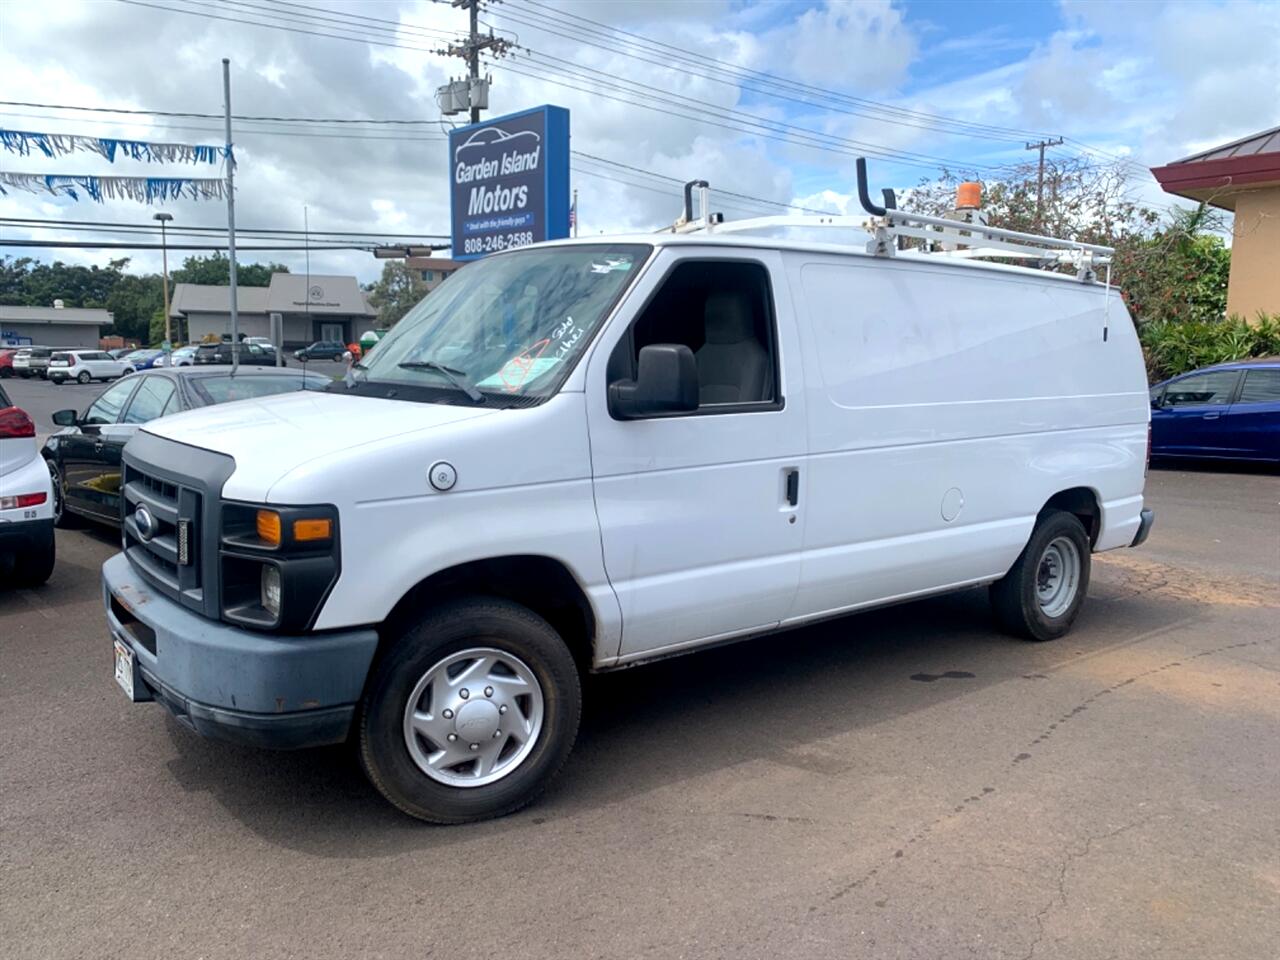 Used 2013 Ford E-Series Econoline Van Commercial with VIN 1FTNE1EW4DDA19689 for sale in Lihue, HI